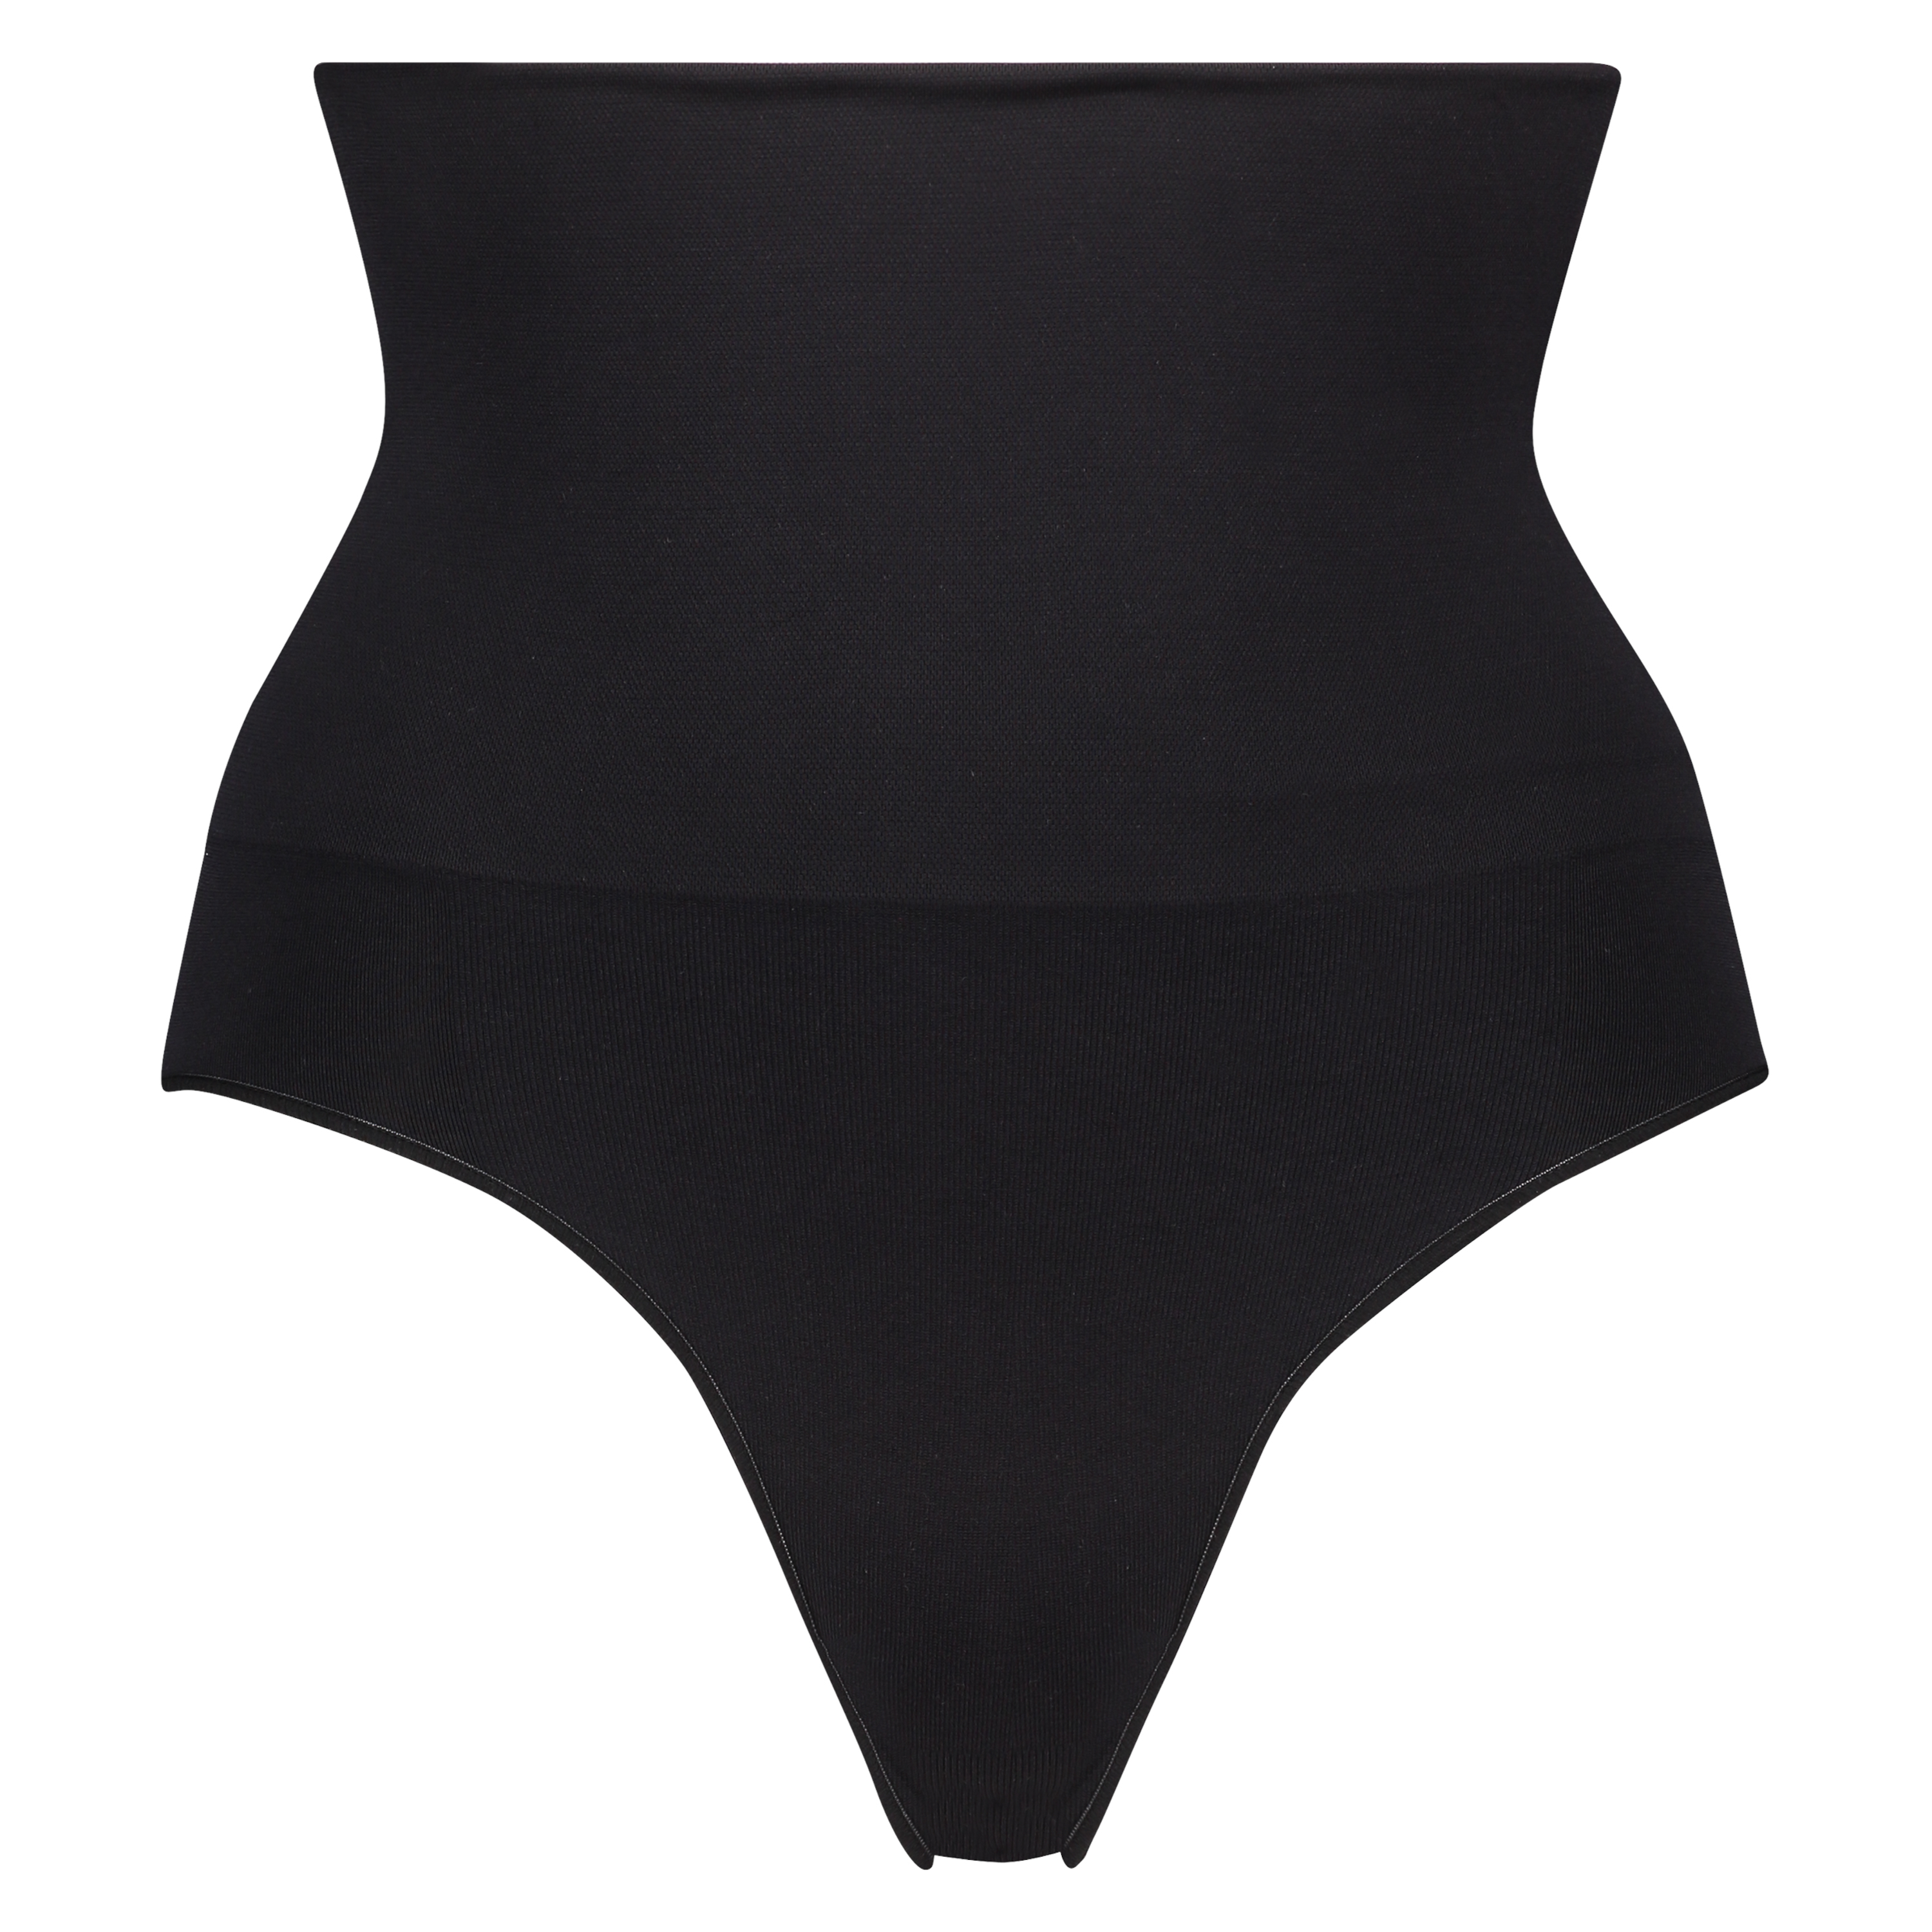 Firming high knickers - Level 2, Black, main